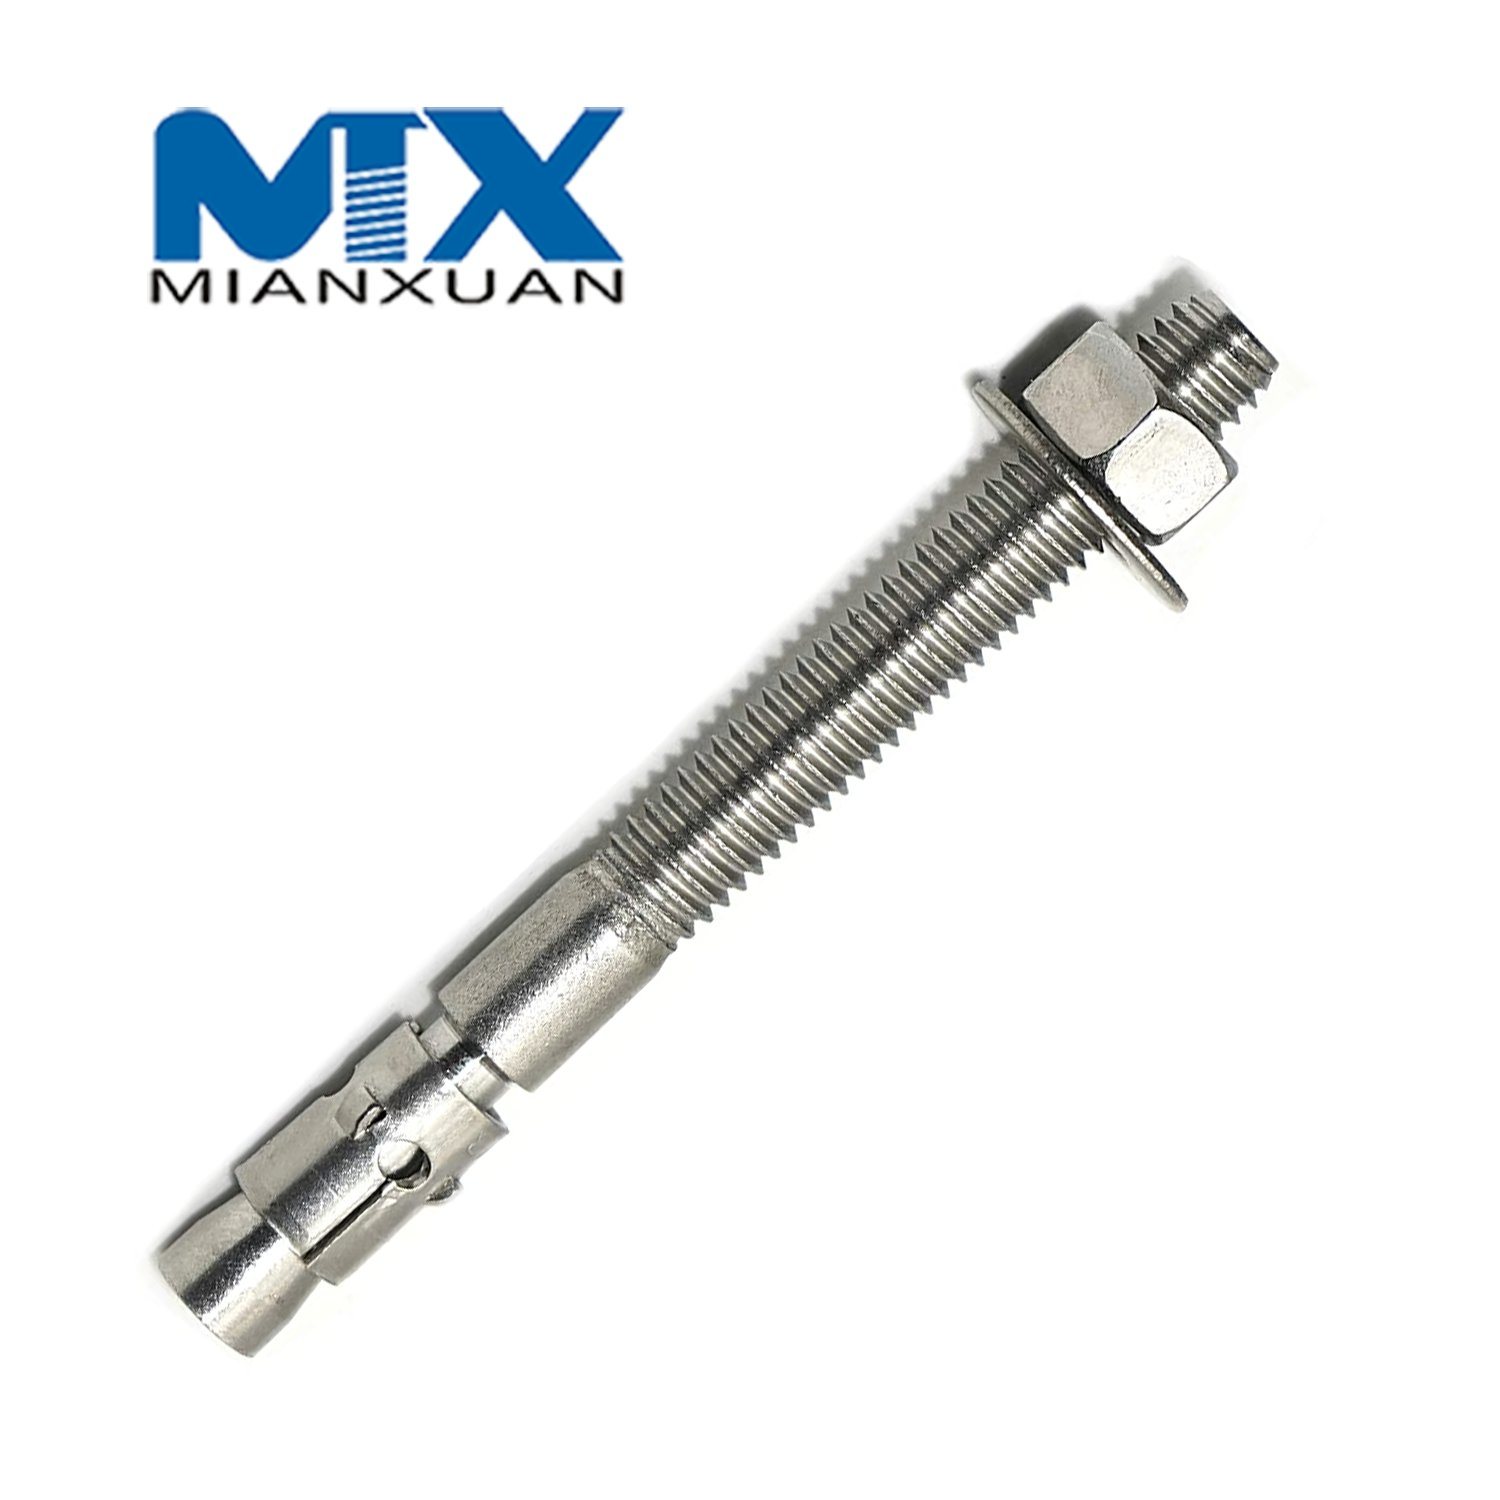 Stainless Steel Expansion Bolt for Carriage Hex U Through Wedge Anchor Fastener